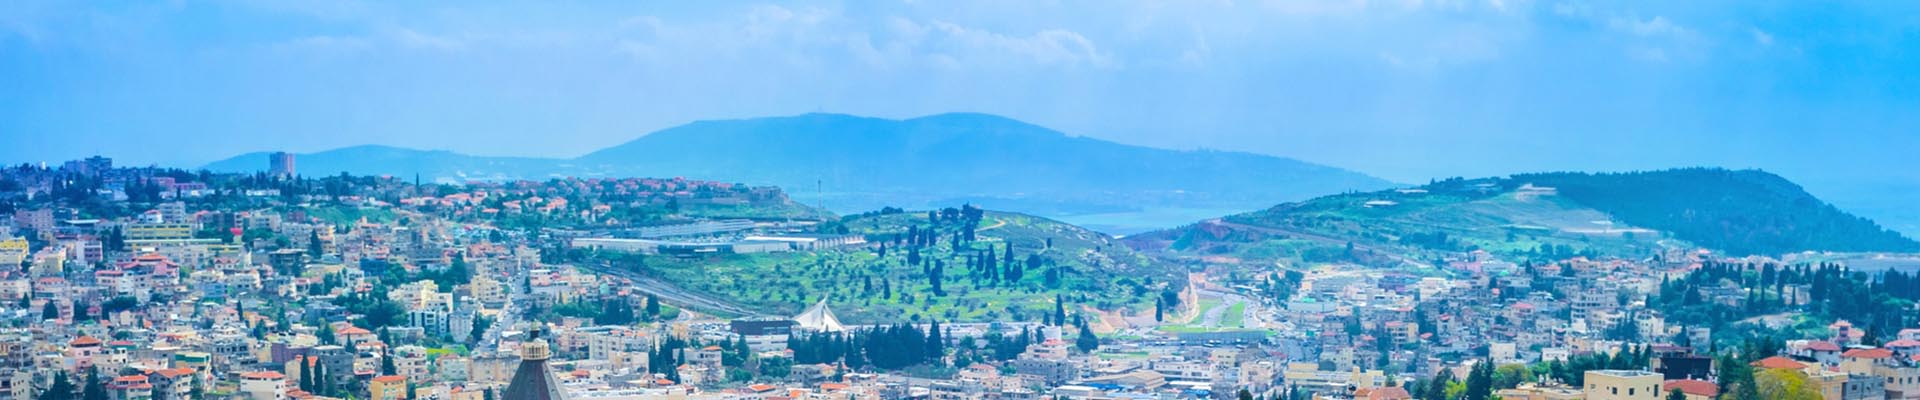 8 Day Israel Christian Private Tour Galilee Focus